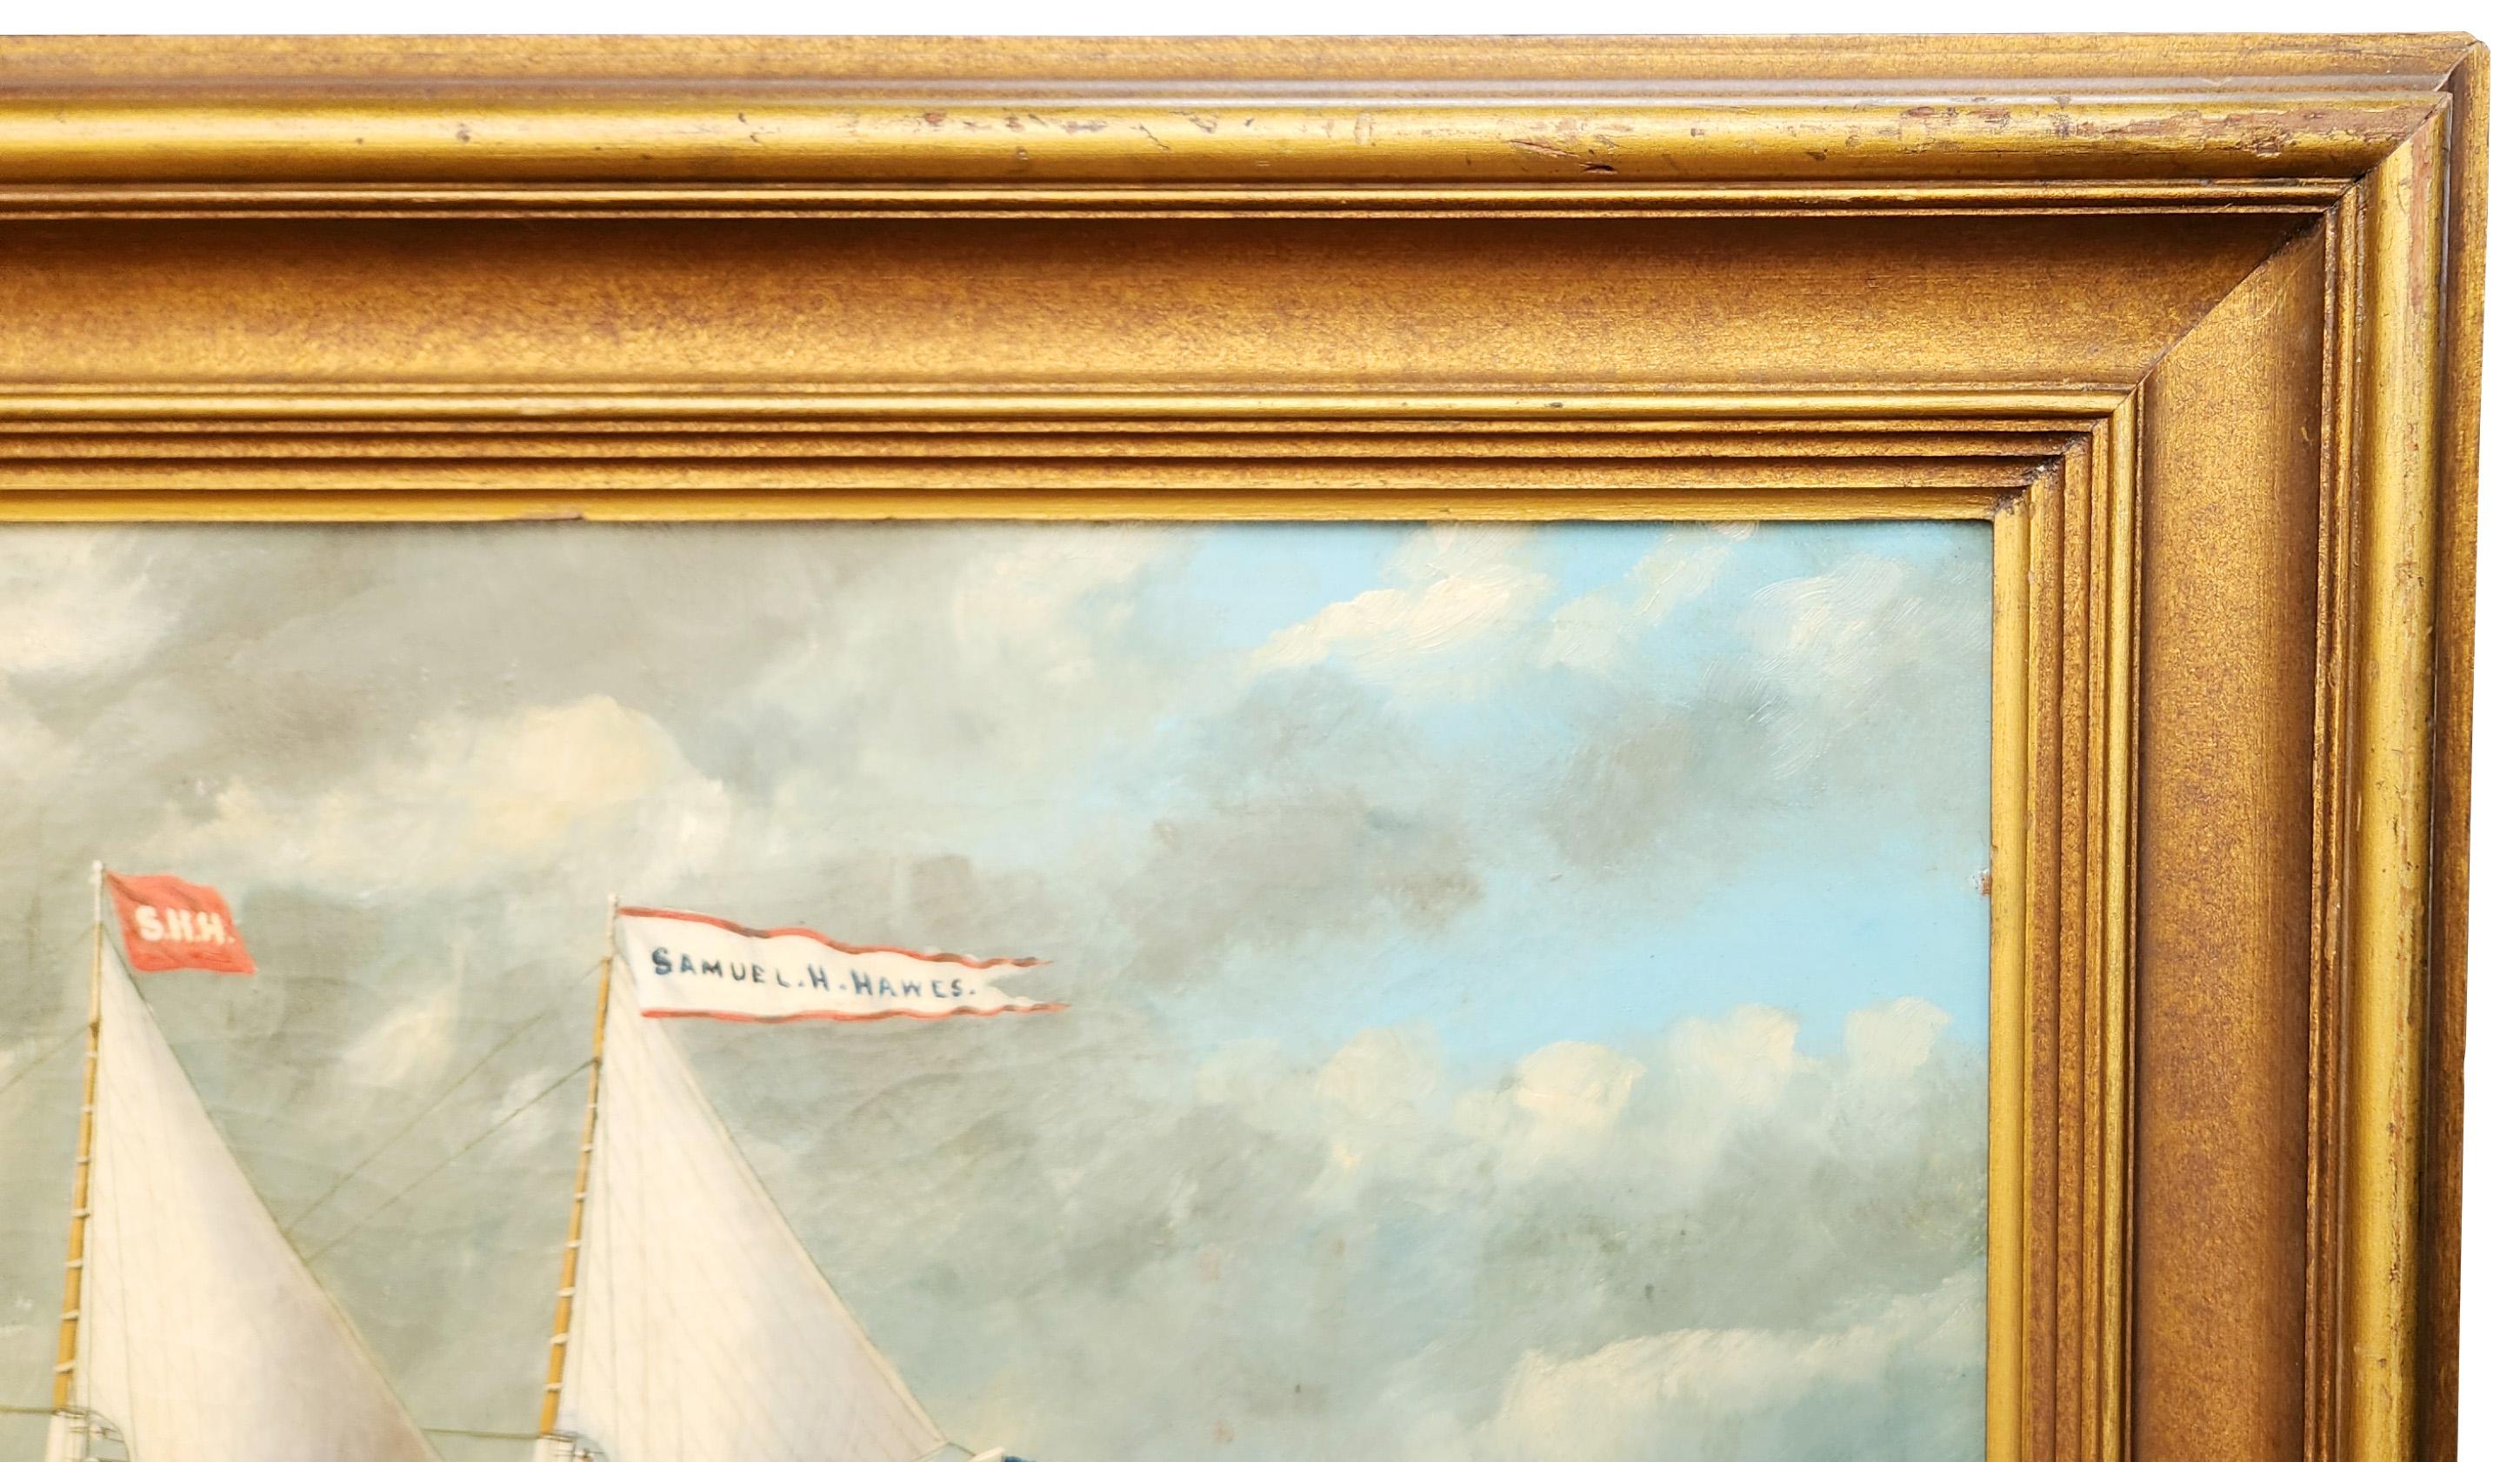 This 3 masted schooner, was one of the fastest vessels in the 1880s. Traveling through New England, Stubbs was a known figure painting in the regular ports along the coast. This oil is in excellent condition on a bright and breezy day. A light chop